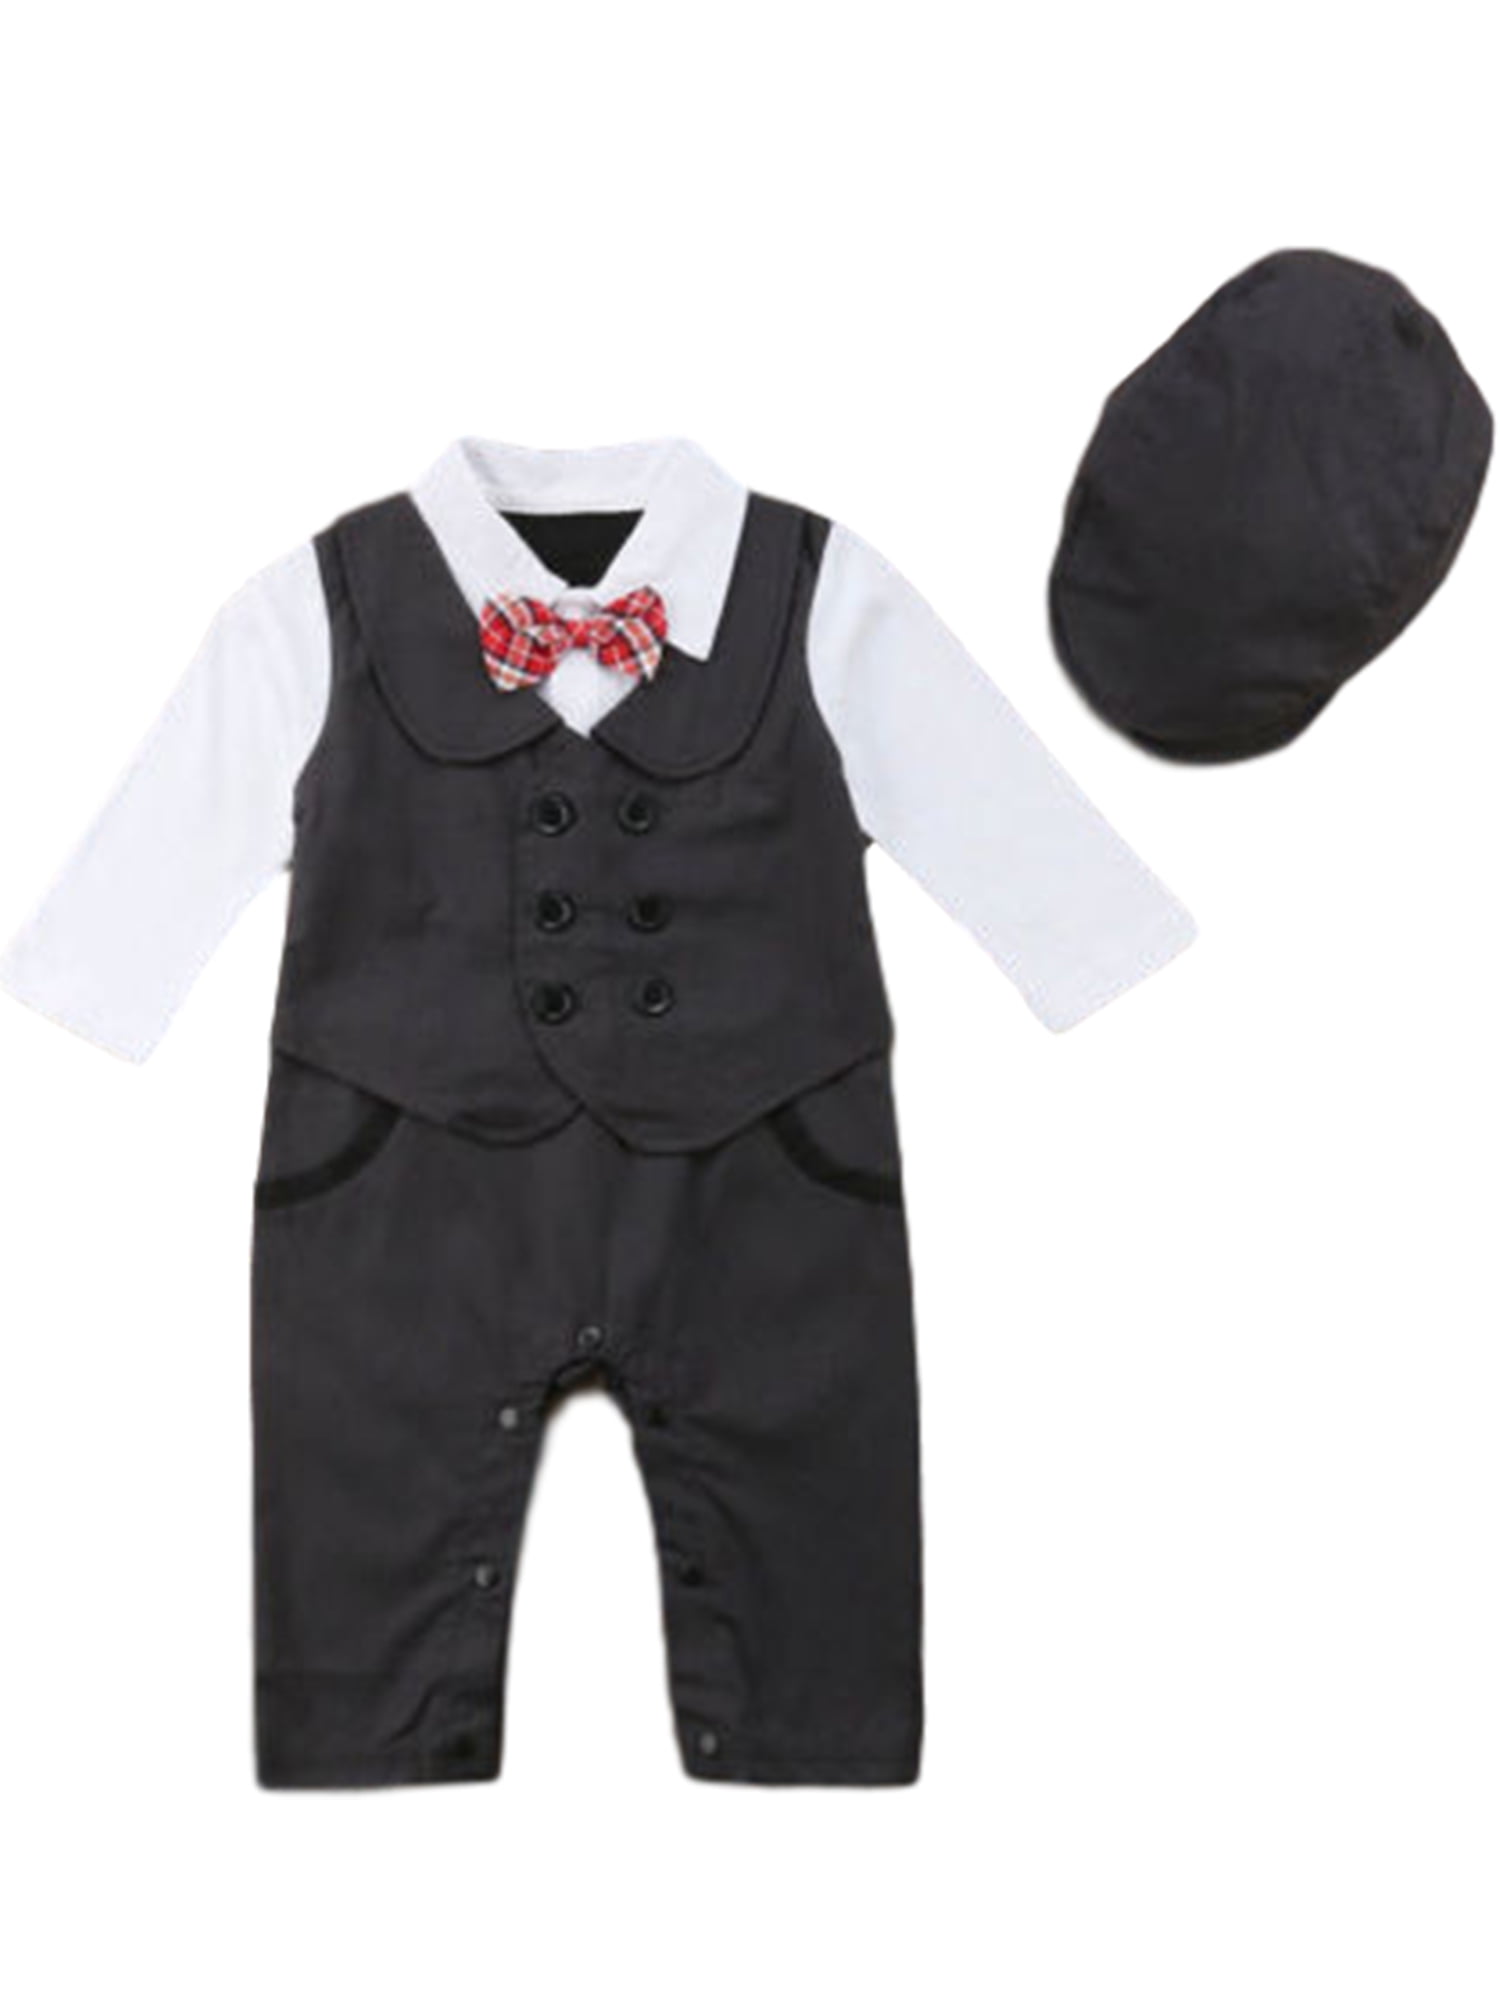 Black Tuxedo With Red Rose Baby Cute Grow Clothes Bodysuit Vest Romper Boys Gift 